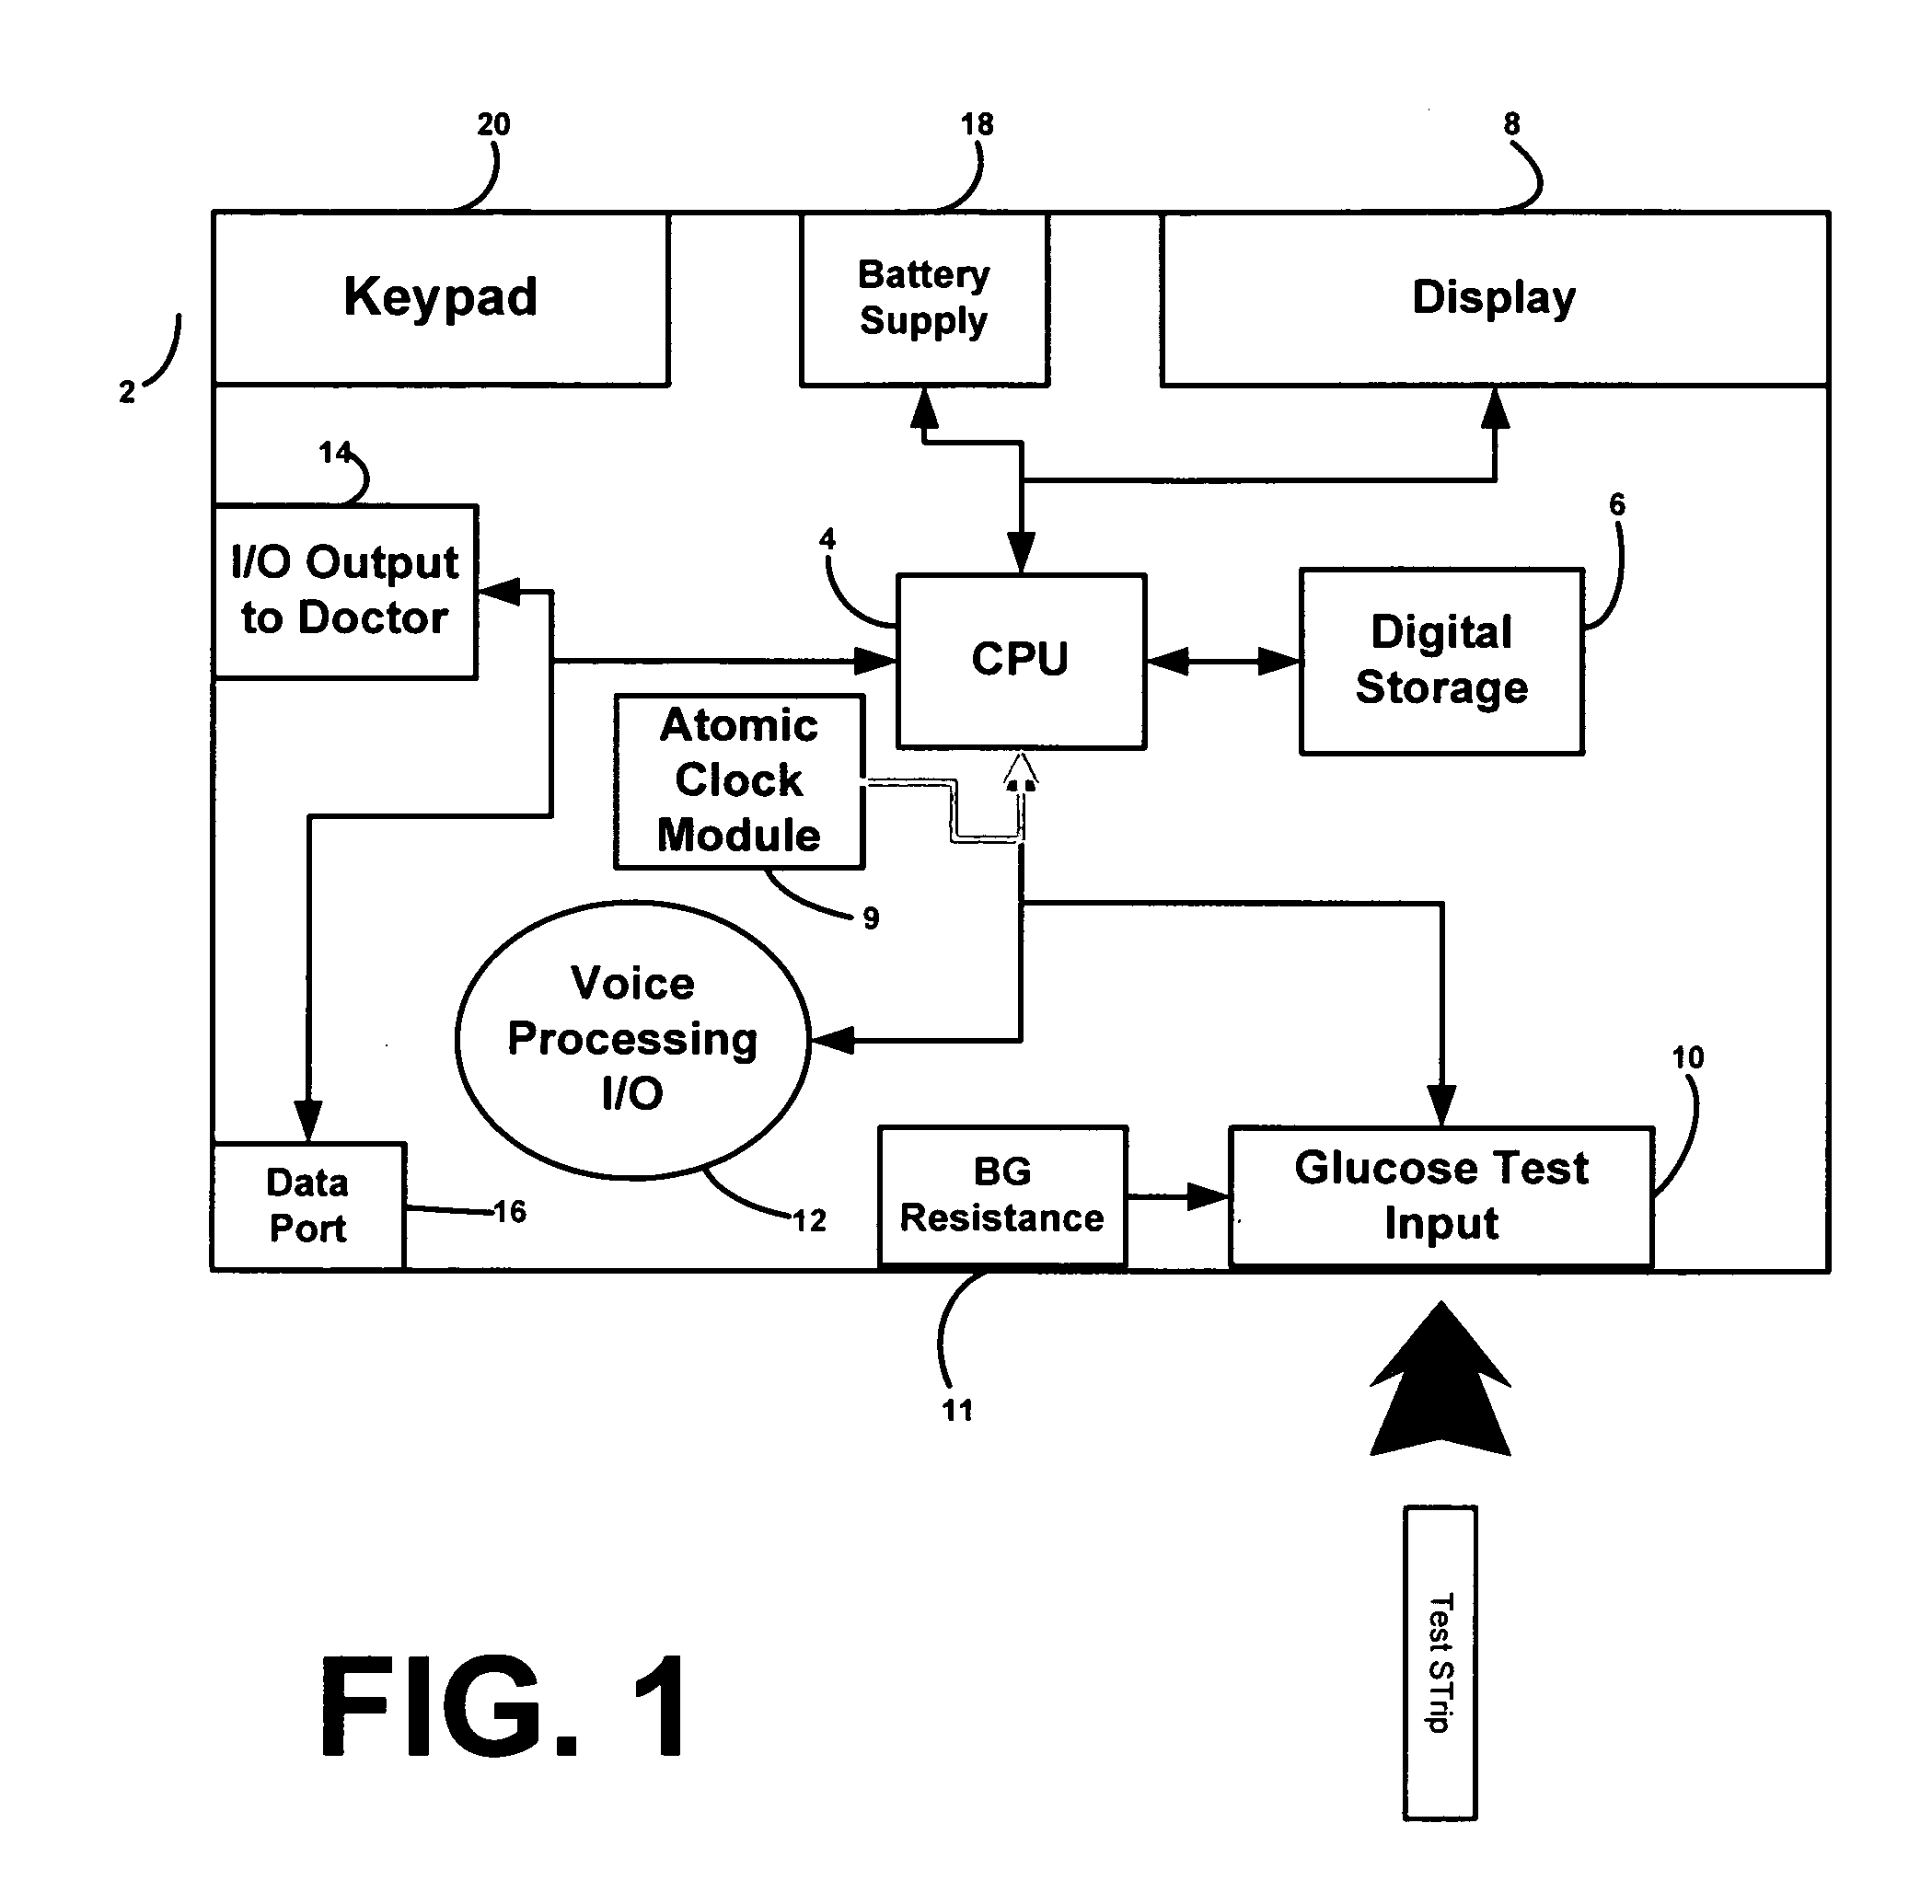 Interactive device for monitoring and reporting glucose levels with integrated atomic clock module